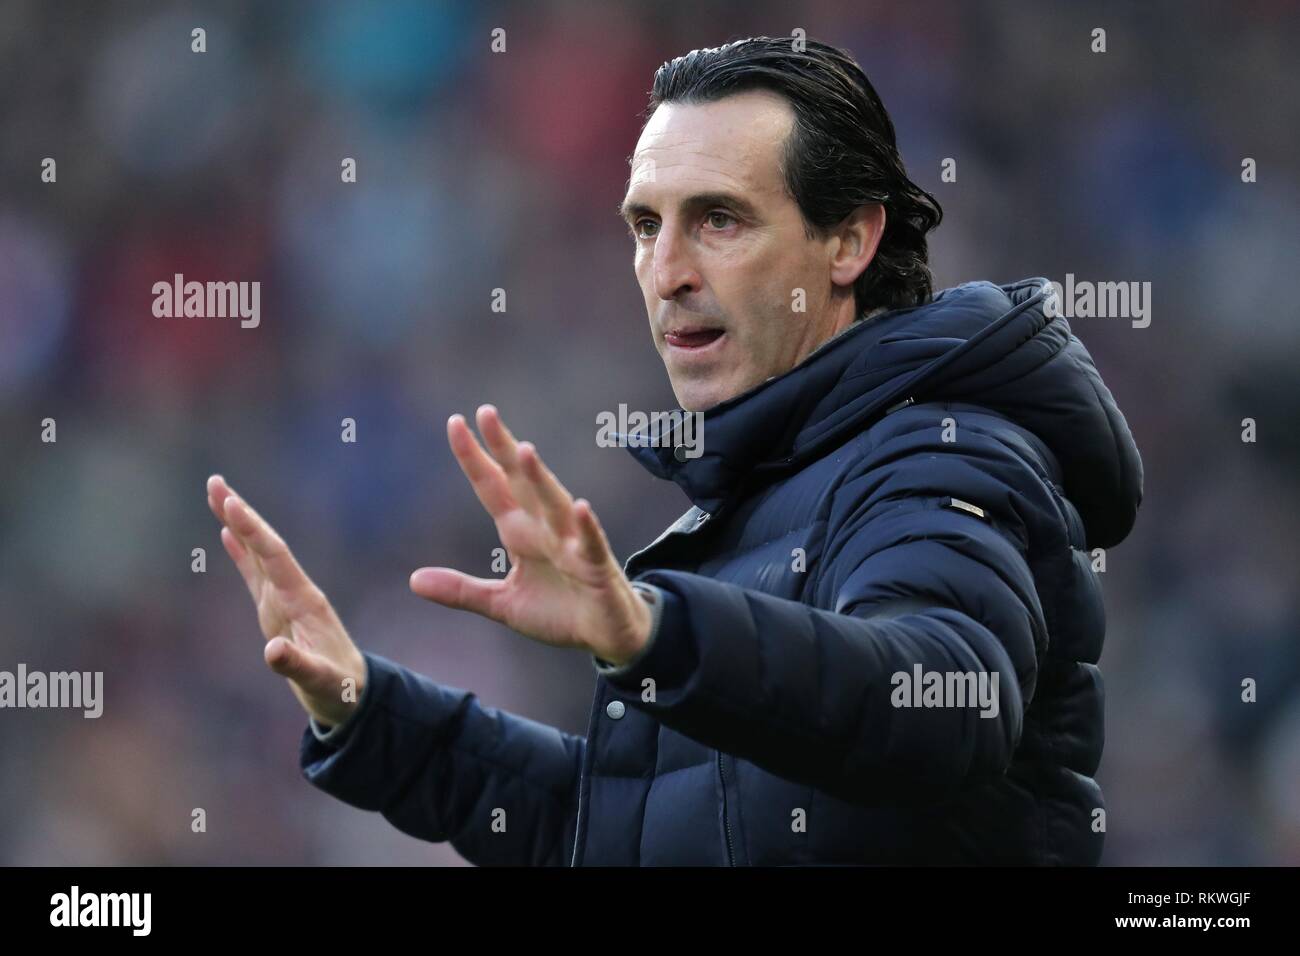 UNAI EMERY, Arsenal FC MANAGER, HUDDERSFIELD TOWN FC V ARSENAL FC, Premier League, 2019 Banque D'Images